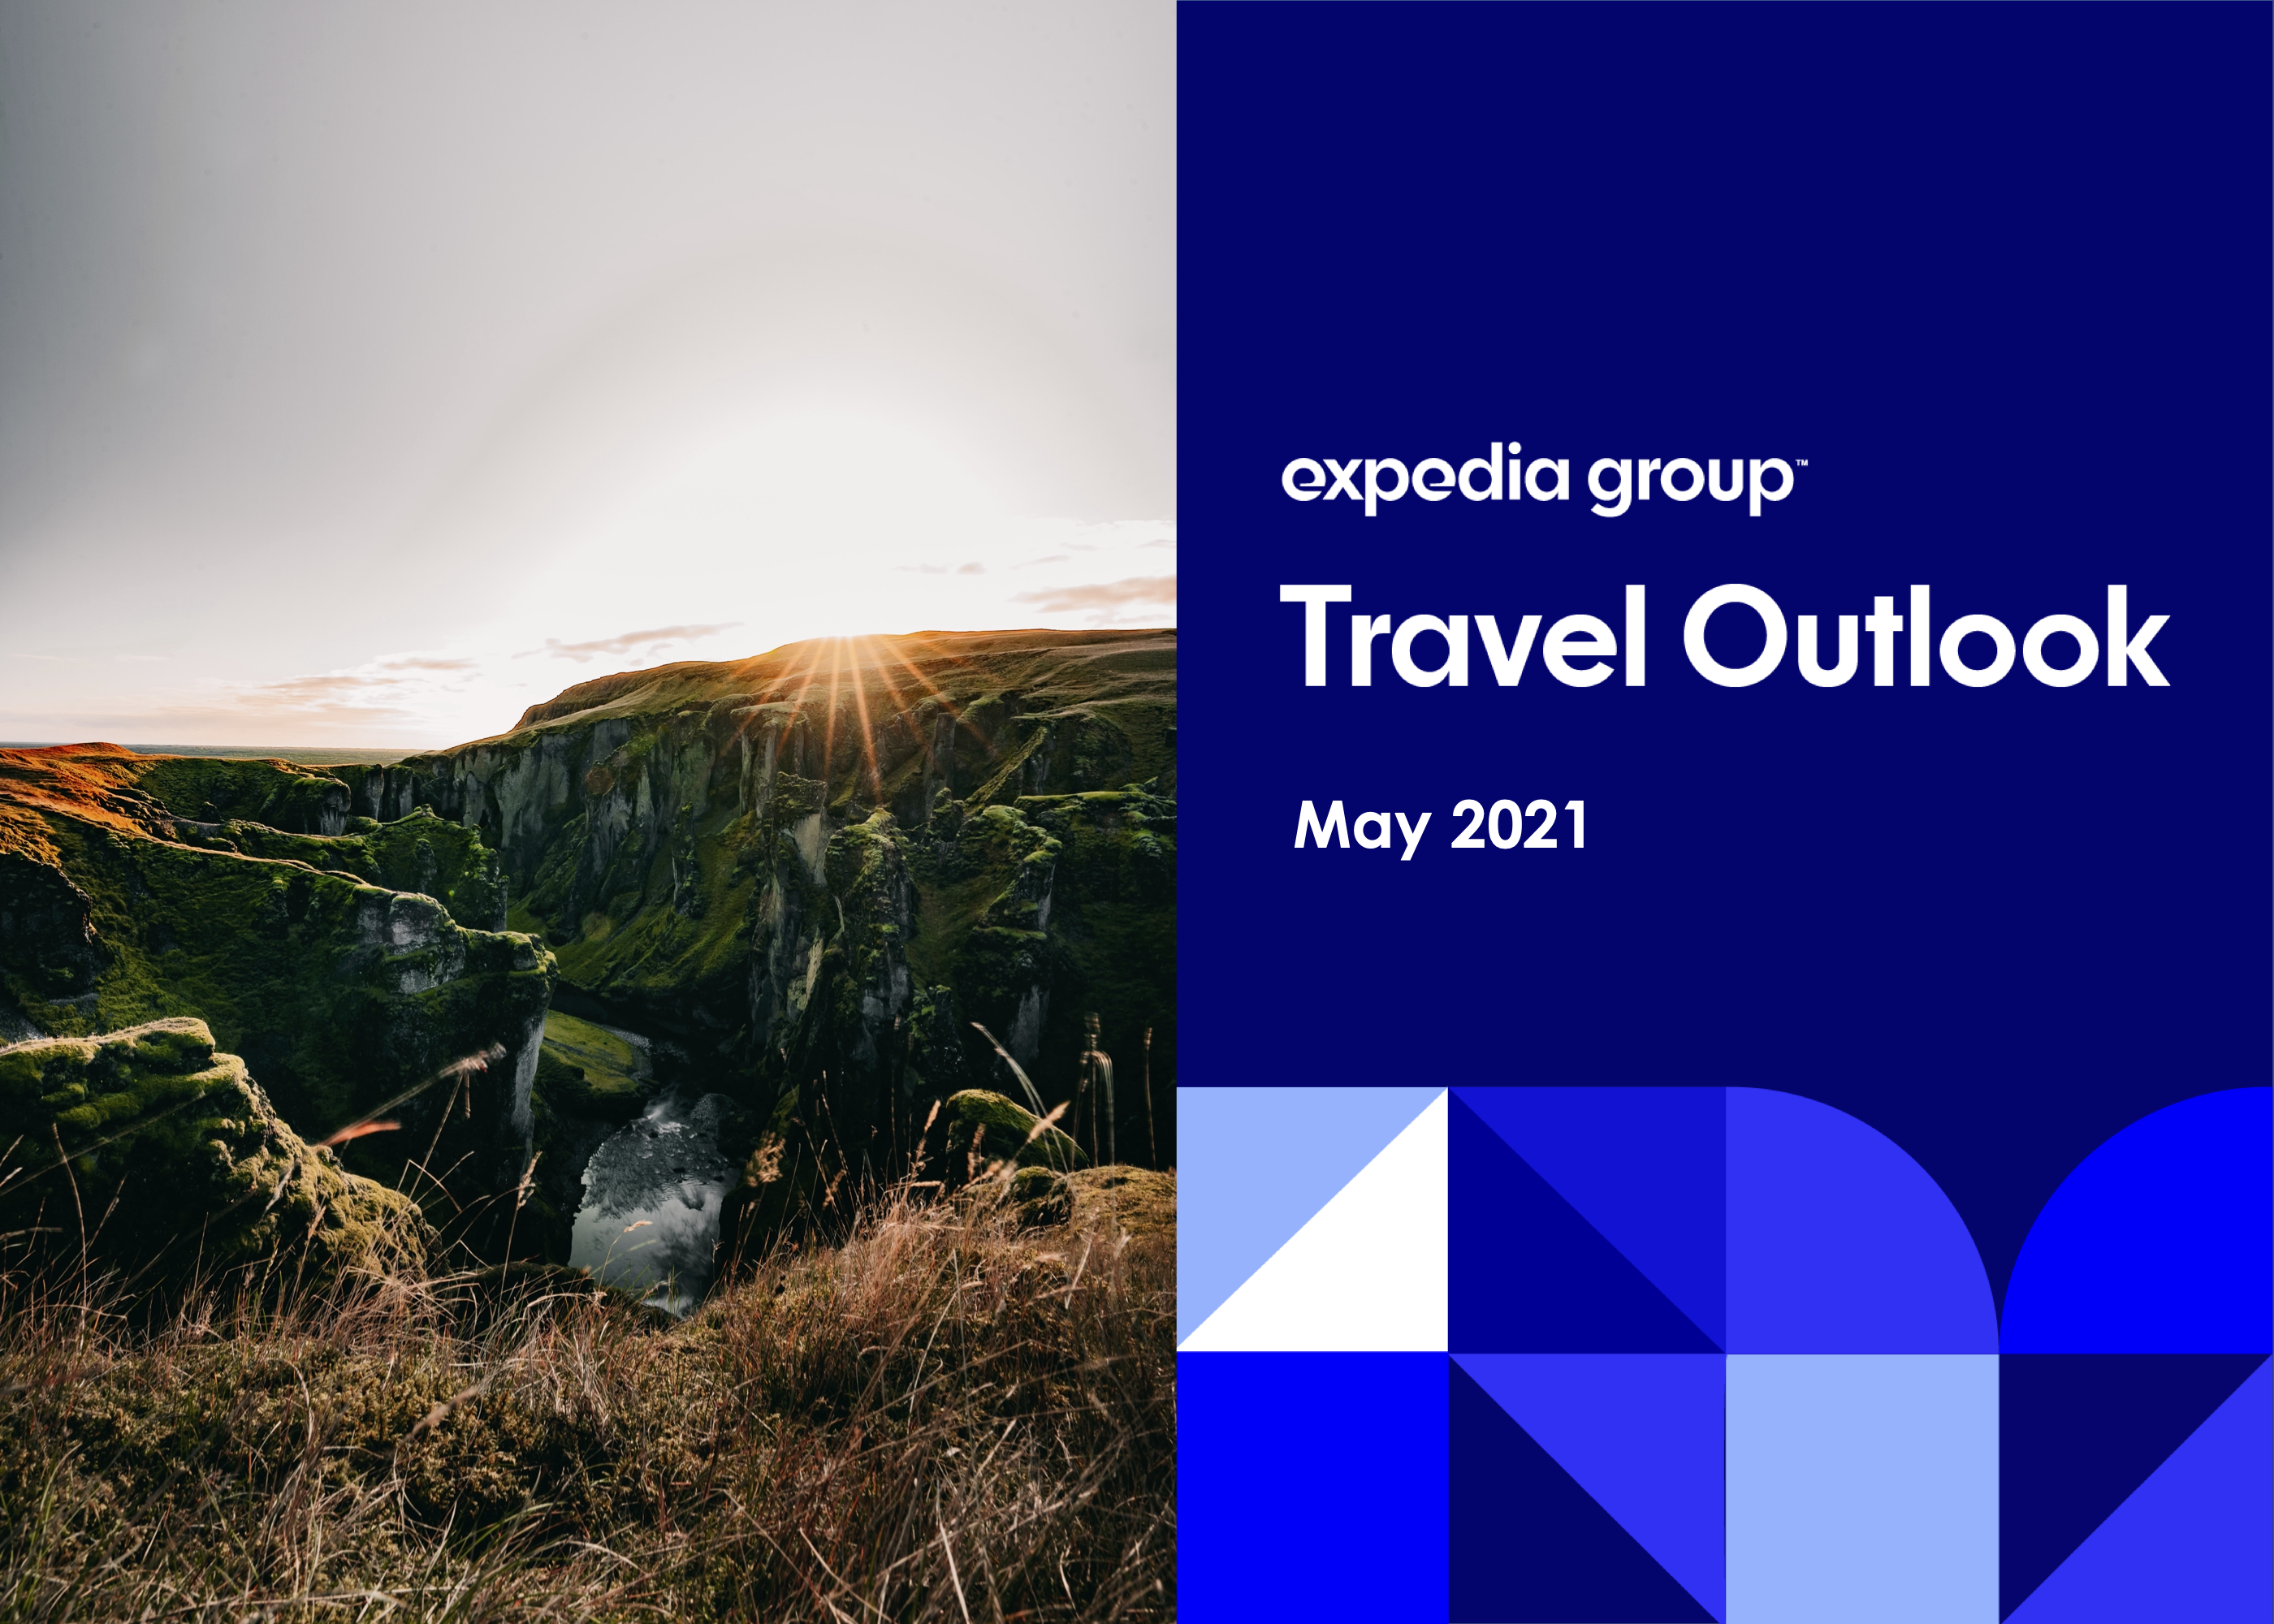 Expedia Group Travel Outlook May 2021